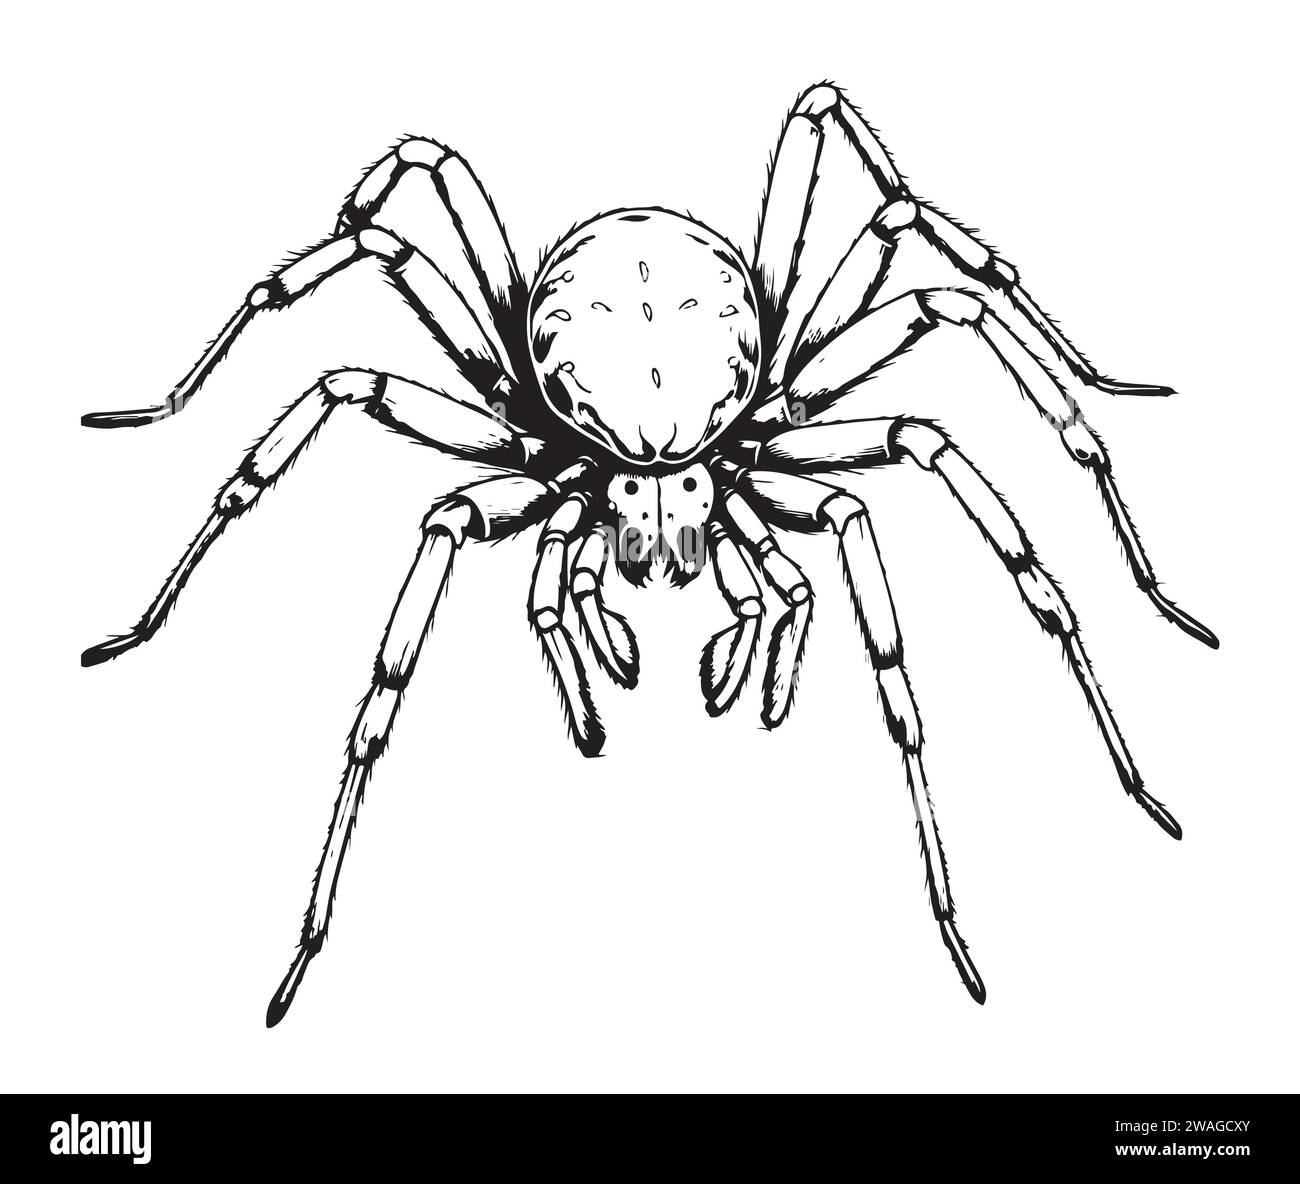 Spider insect sketch hand drawn in doodle style illustration Stock Vector